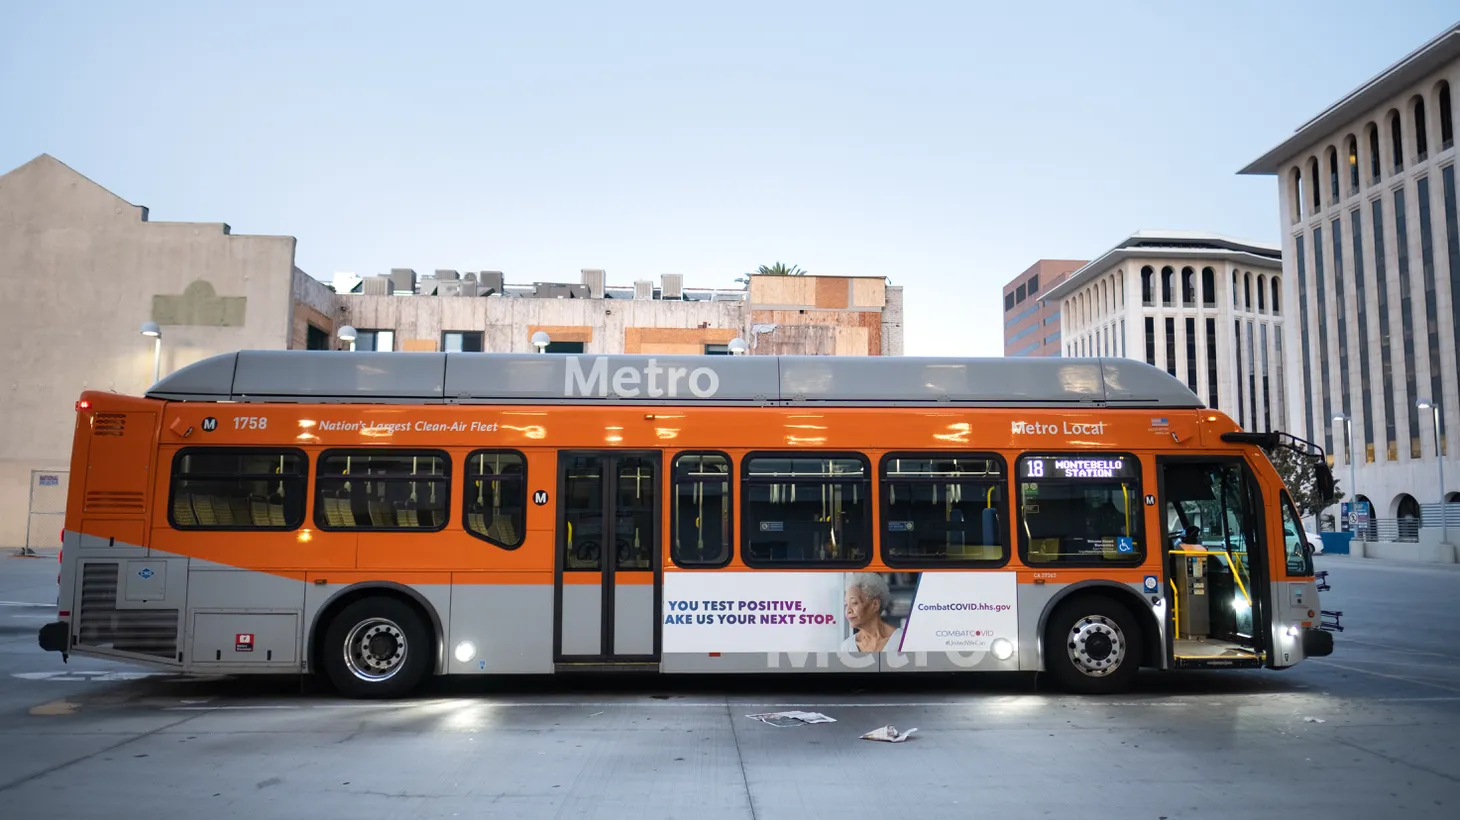 No fares, no police: How free LA Metro could make buses and trains